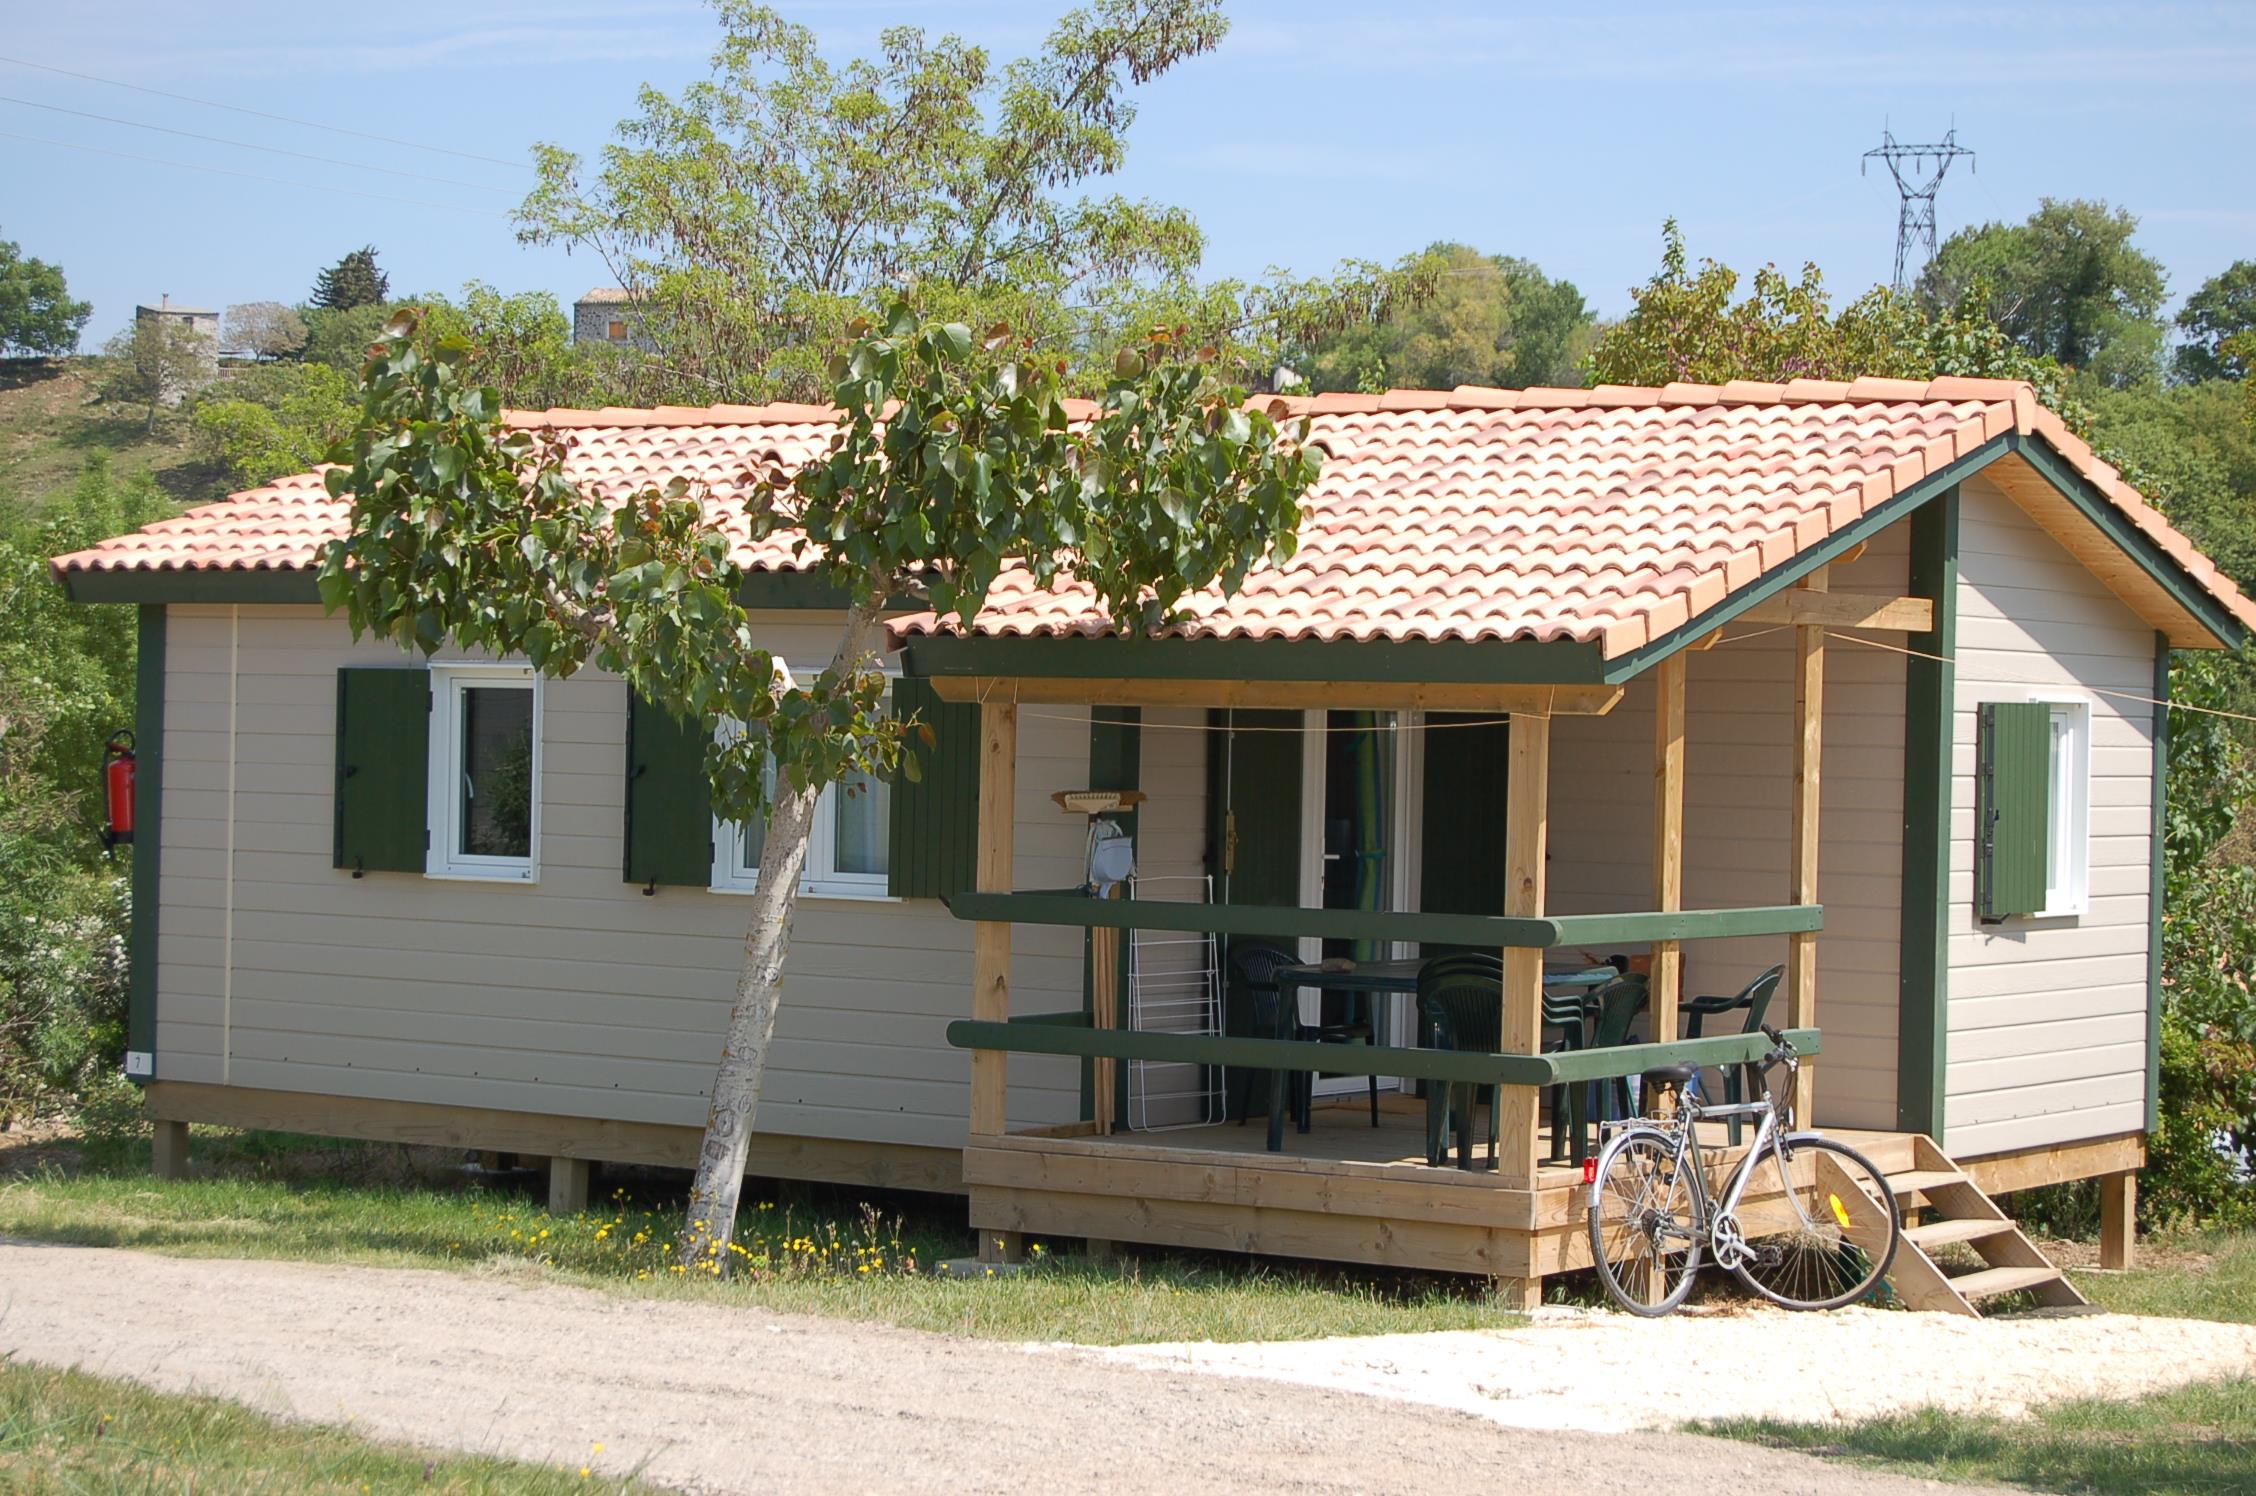 Mietunterkunft - Chalet Edelweiss - Camping Les Arches